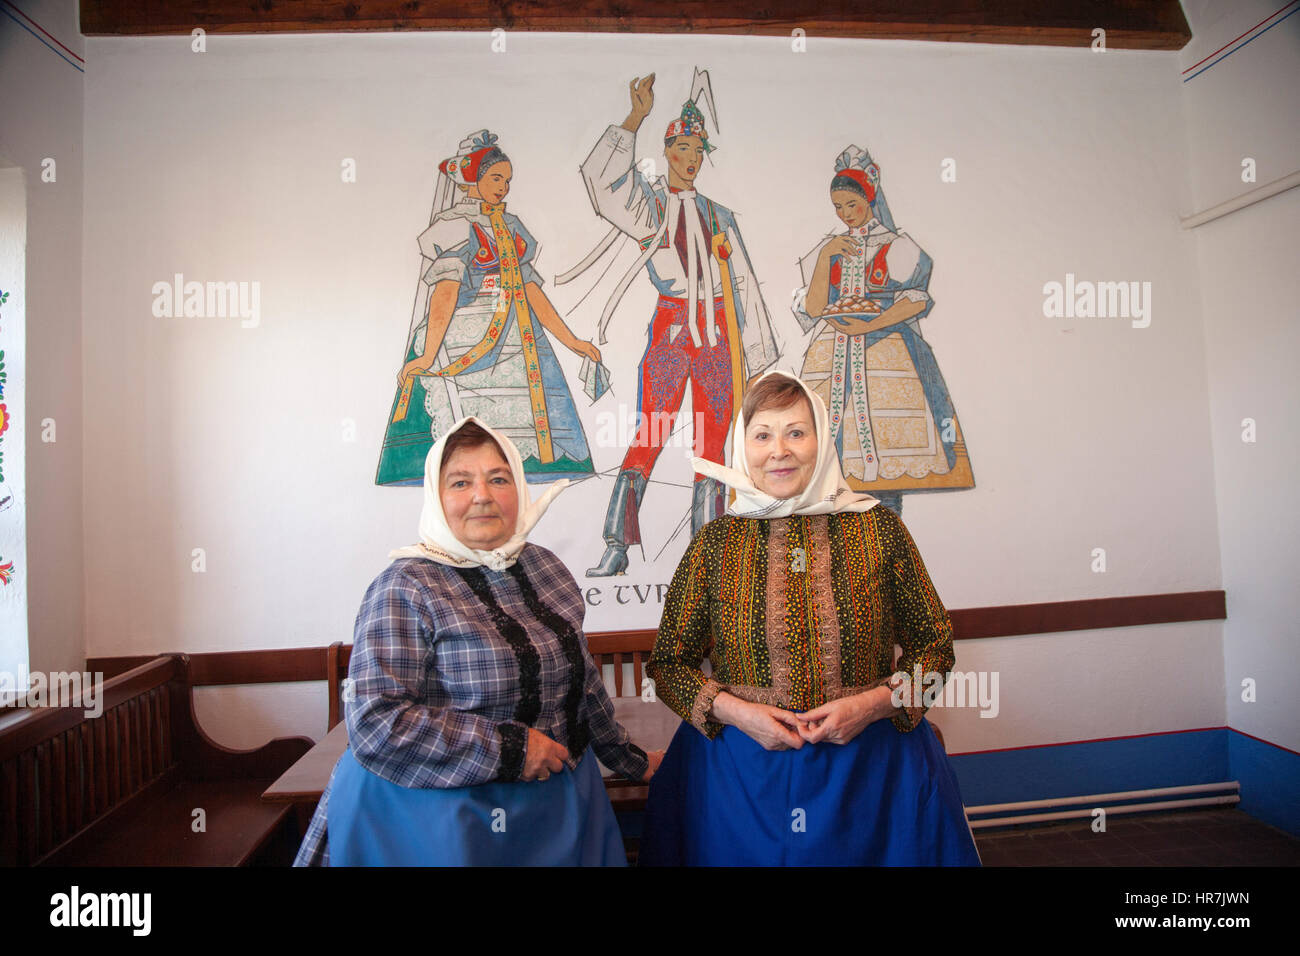 Portrait of Moravian women in front of a mural Stock Photo